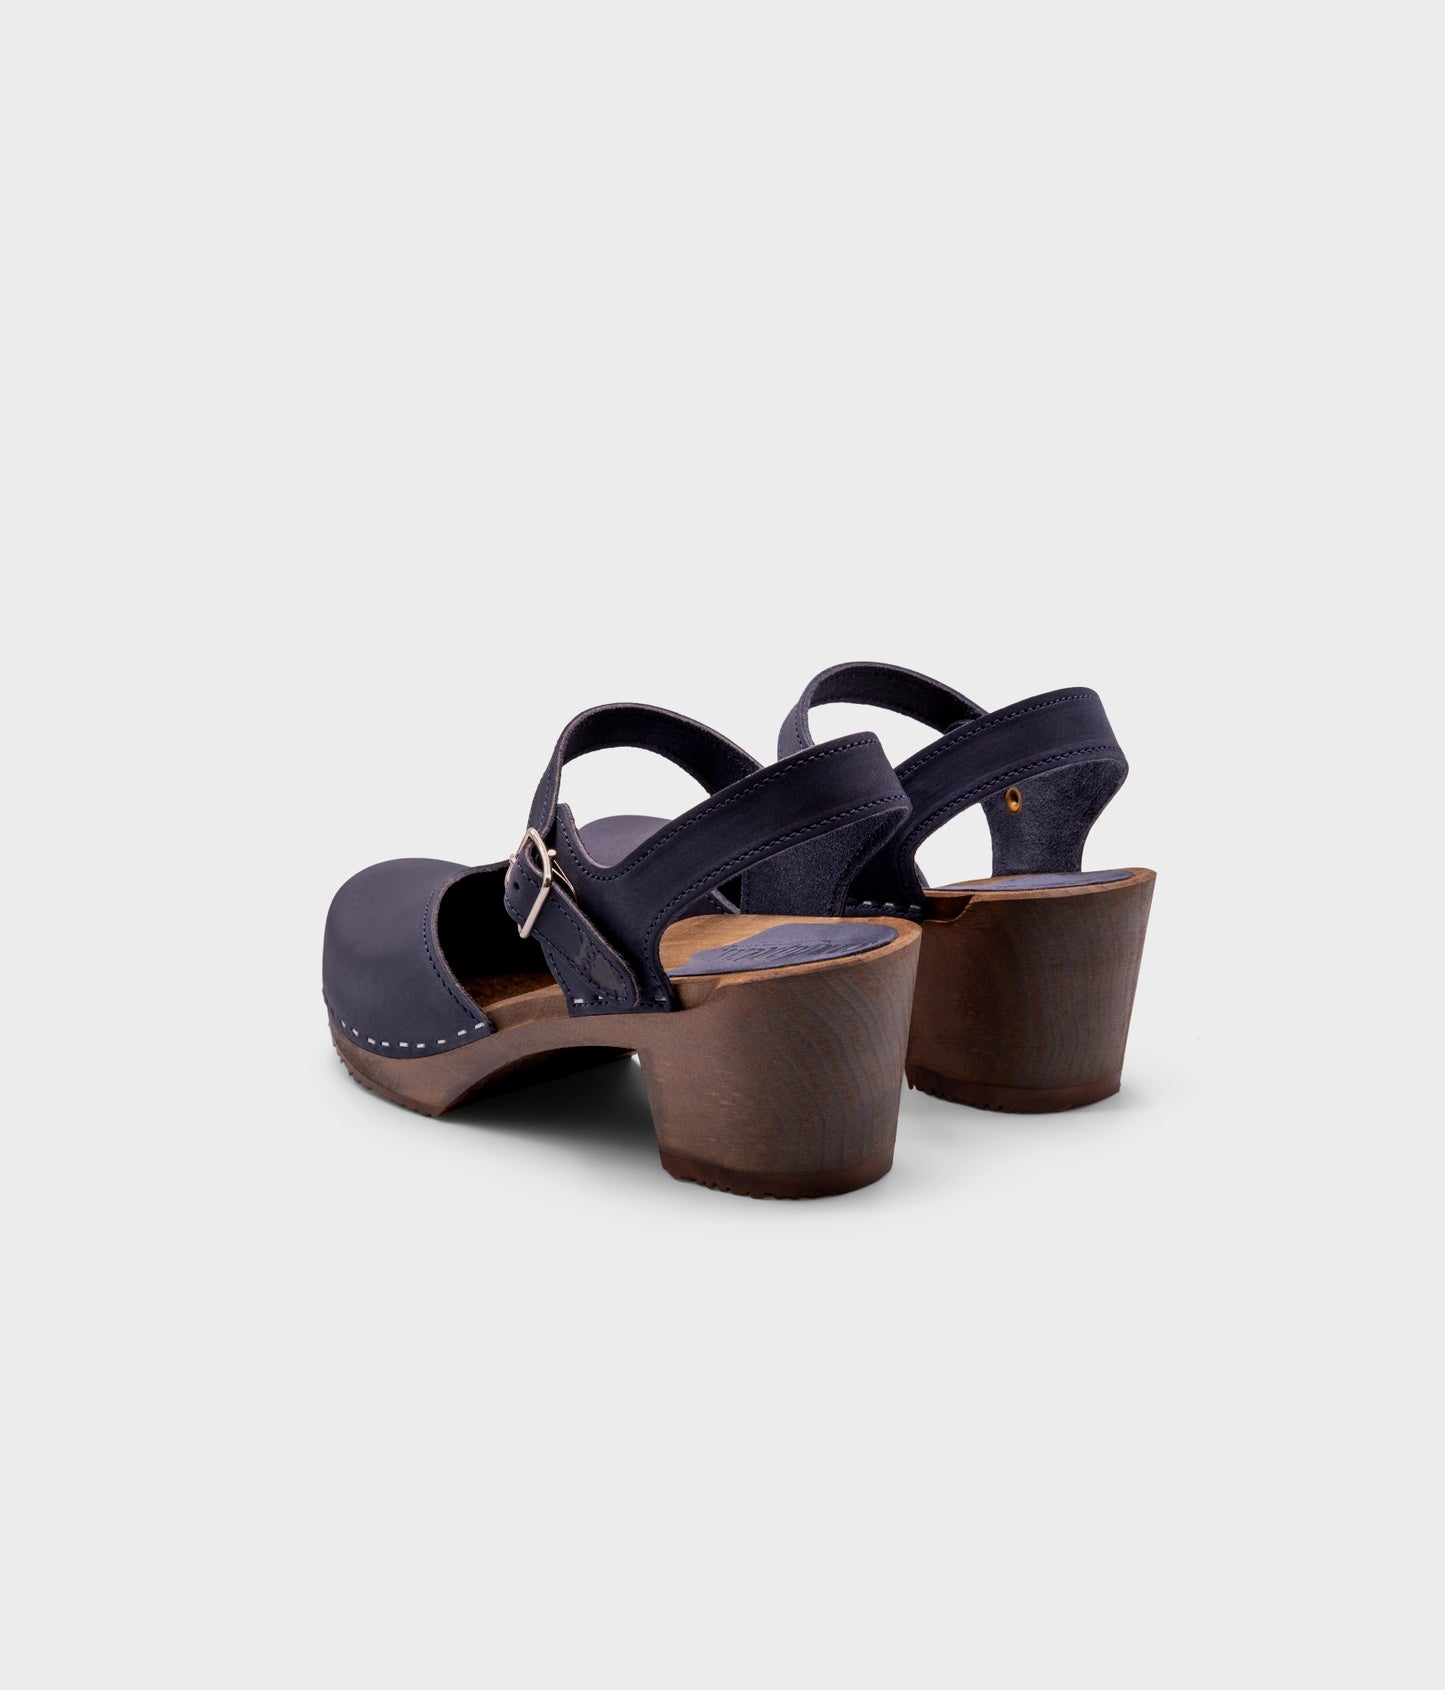 high heeled closed-toe clog sandal in navy blue nubuck leather stapled on a dark wooden base